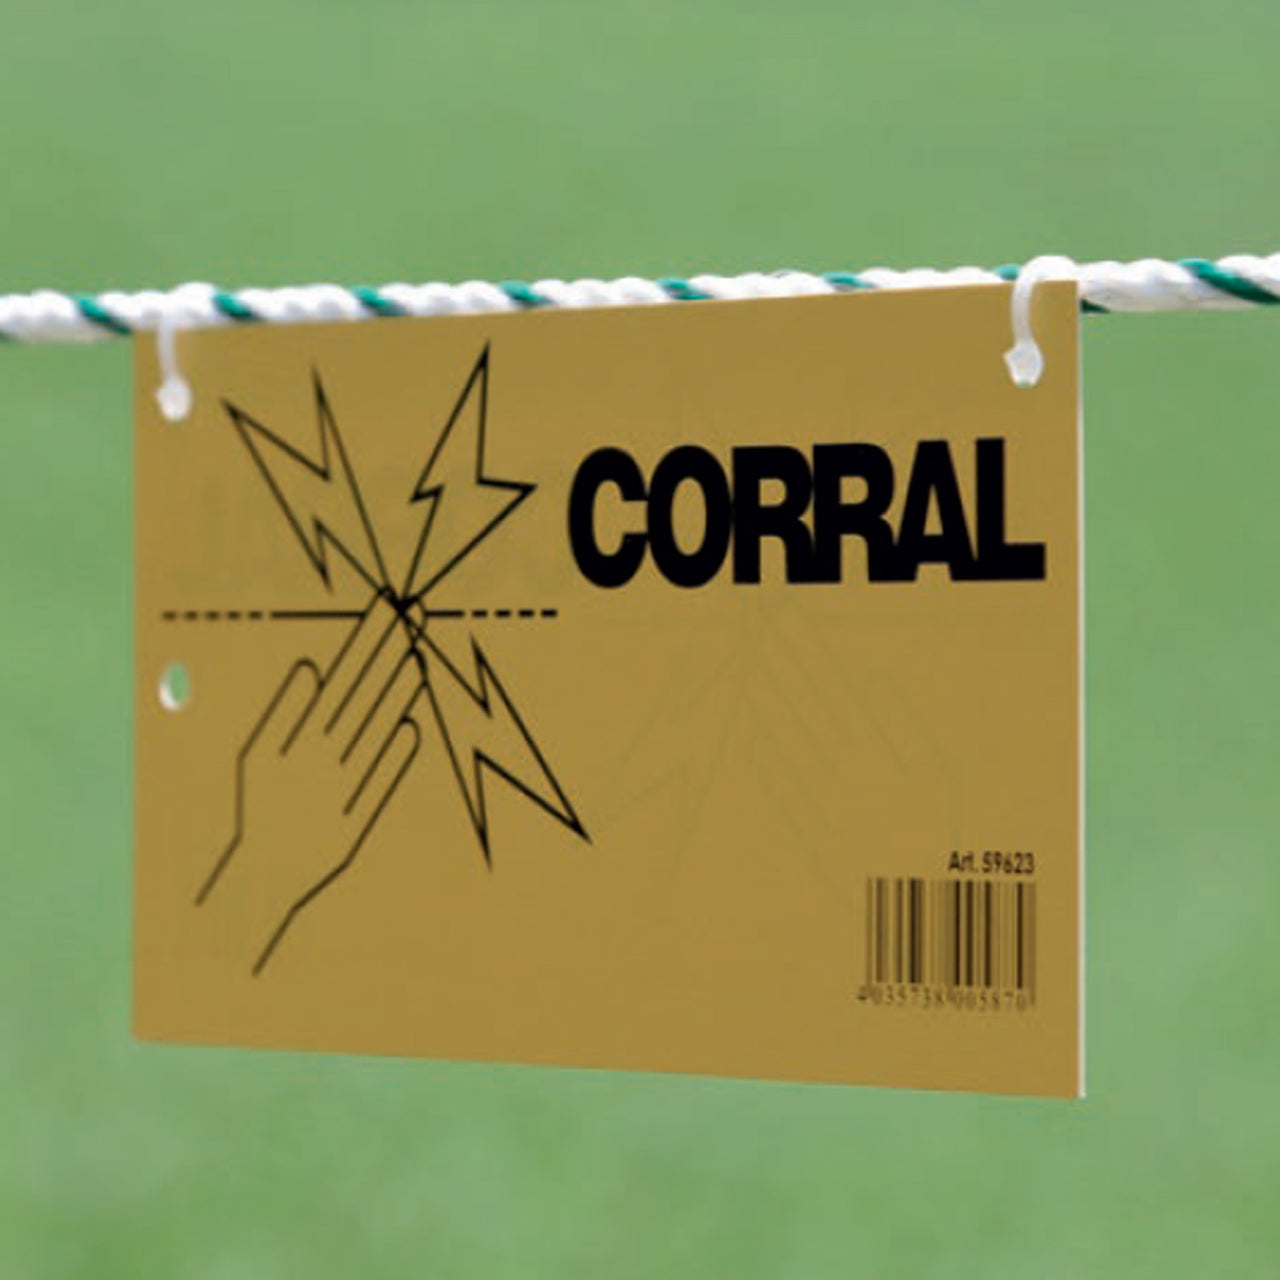 CORRAL warning sign electric fence